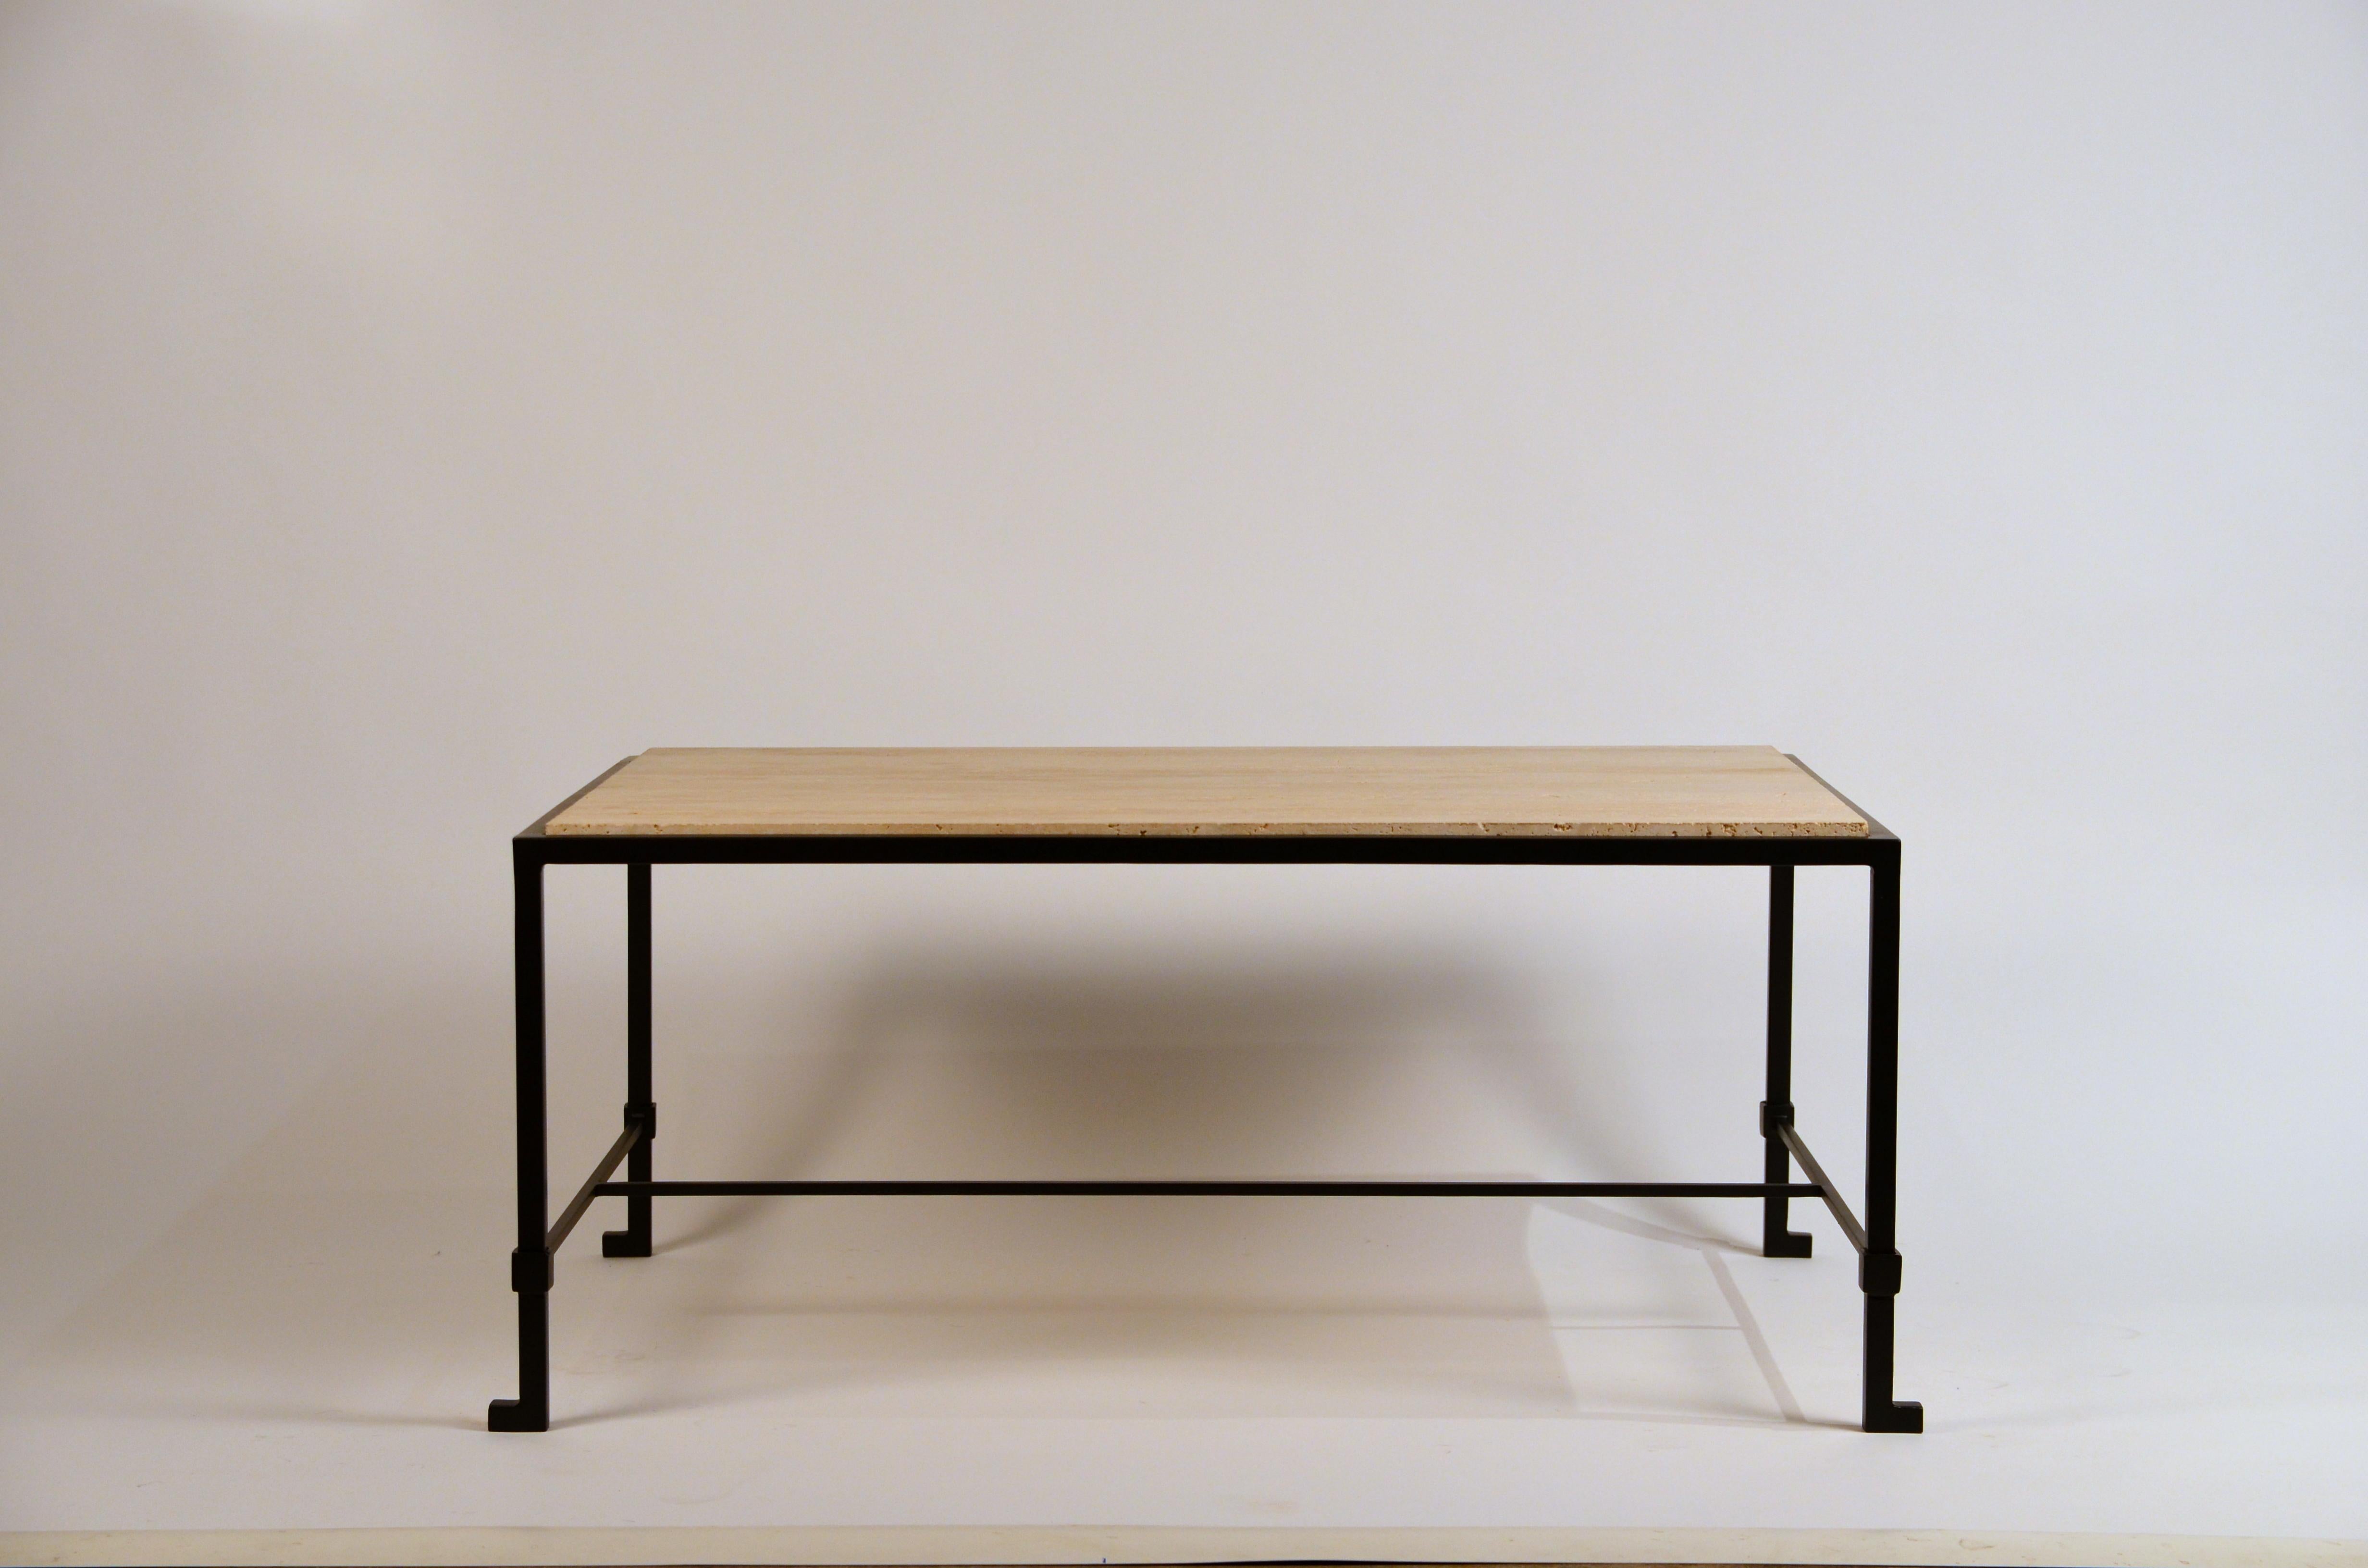 French Chic 'Diagramme' Wrought Iron and Travertine Coffee Table by Design Frères For Sale